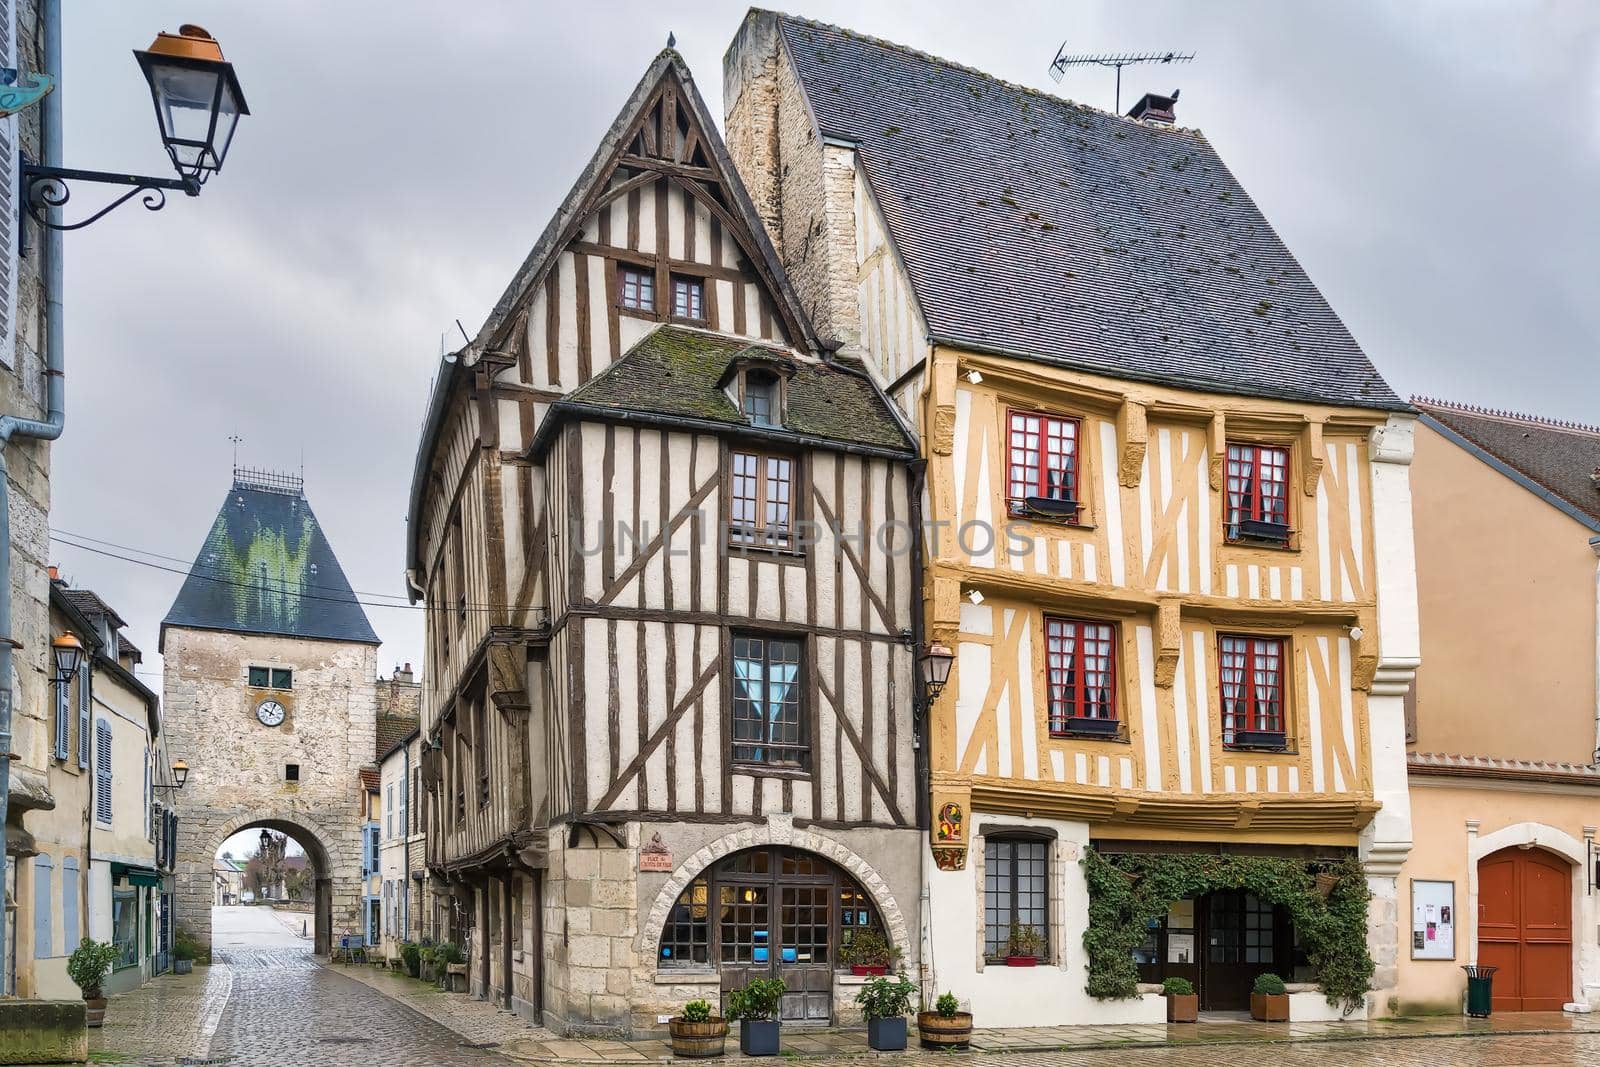 Historical square with half-timbered houses in Noyers (Noyers-sur-Serein), Yonne, France